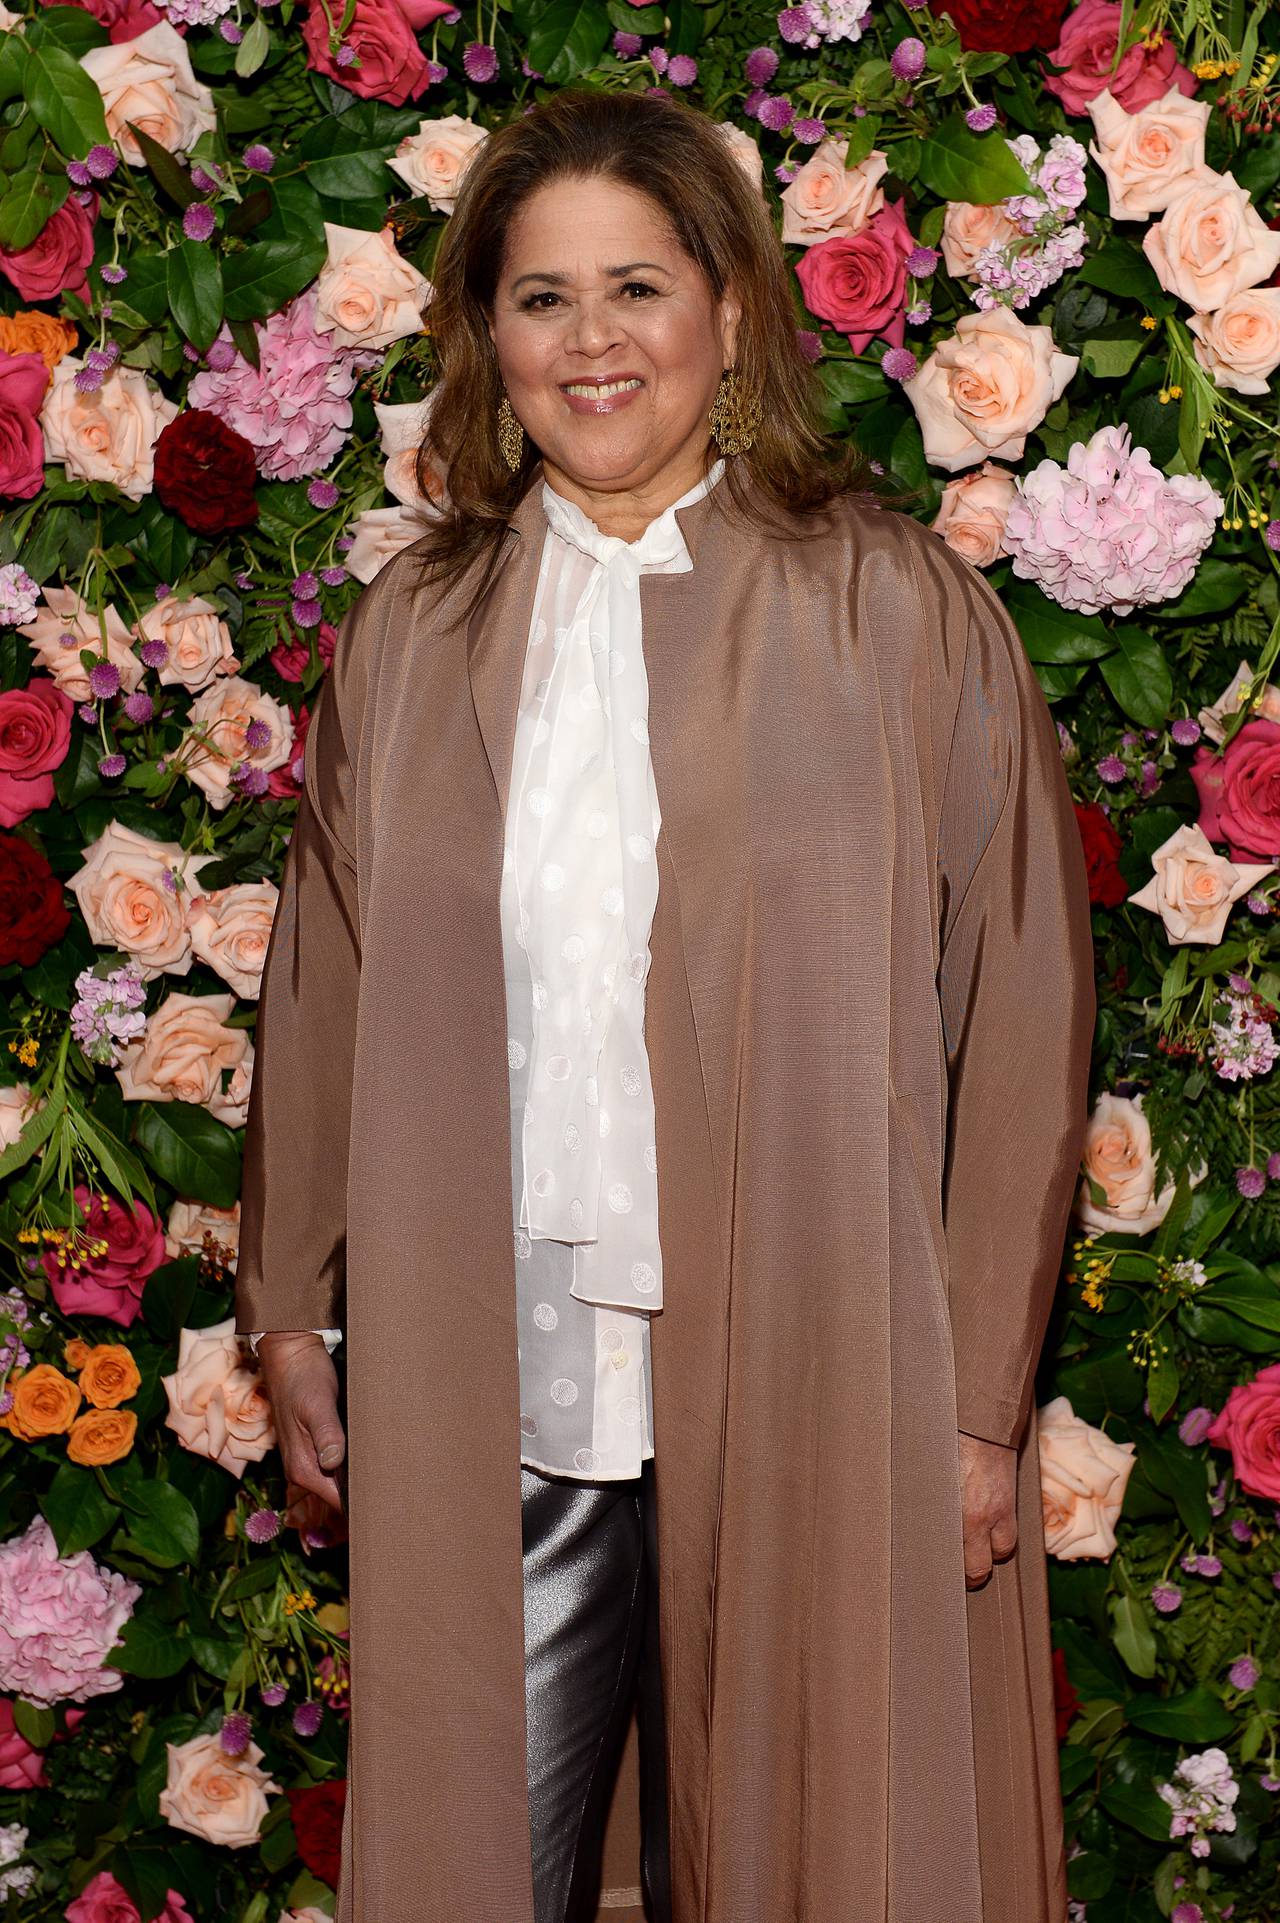 Anna Deavere Smith attends The American Theatre Wing's 2019 Gala at Cipriani 42nd Street on September 16, 2019 in New York City.